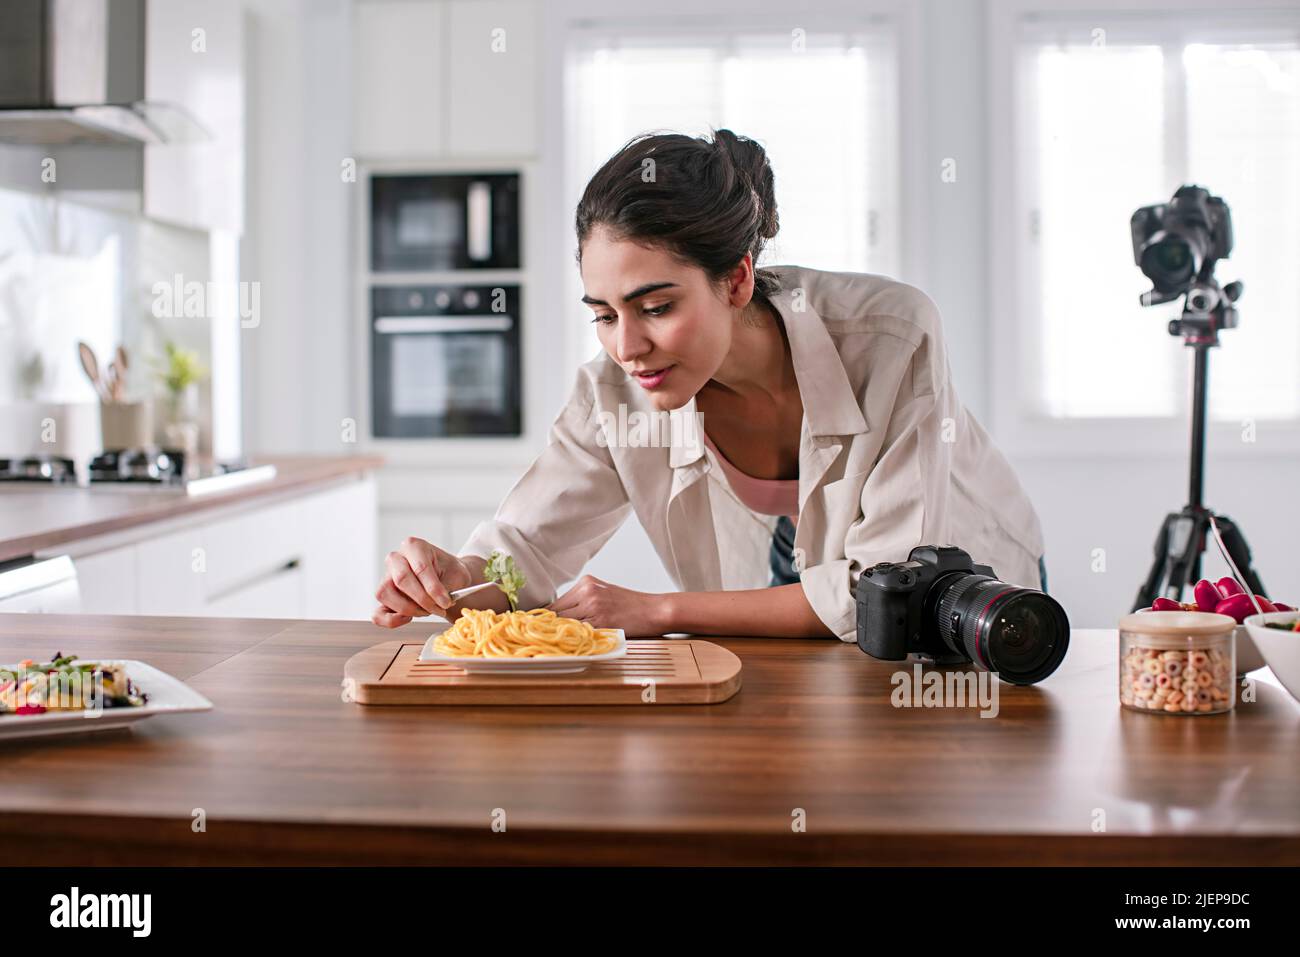 Female food vlogger decorating food in the kitchen Stock Photo